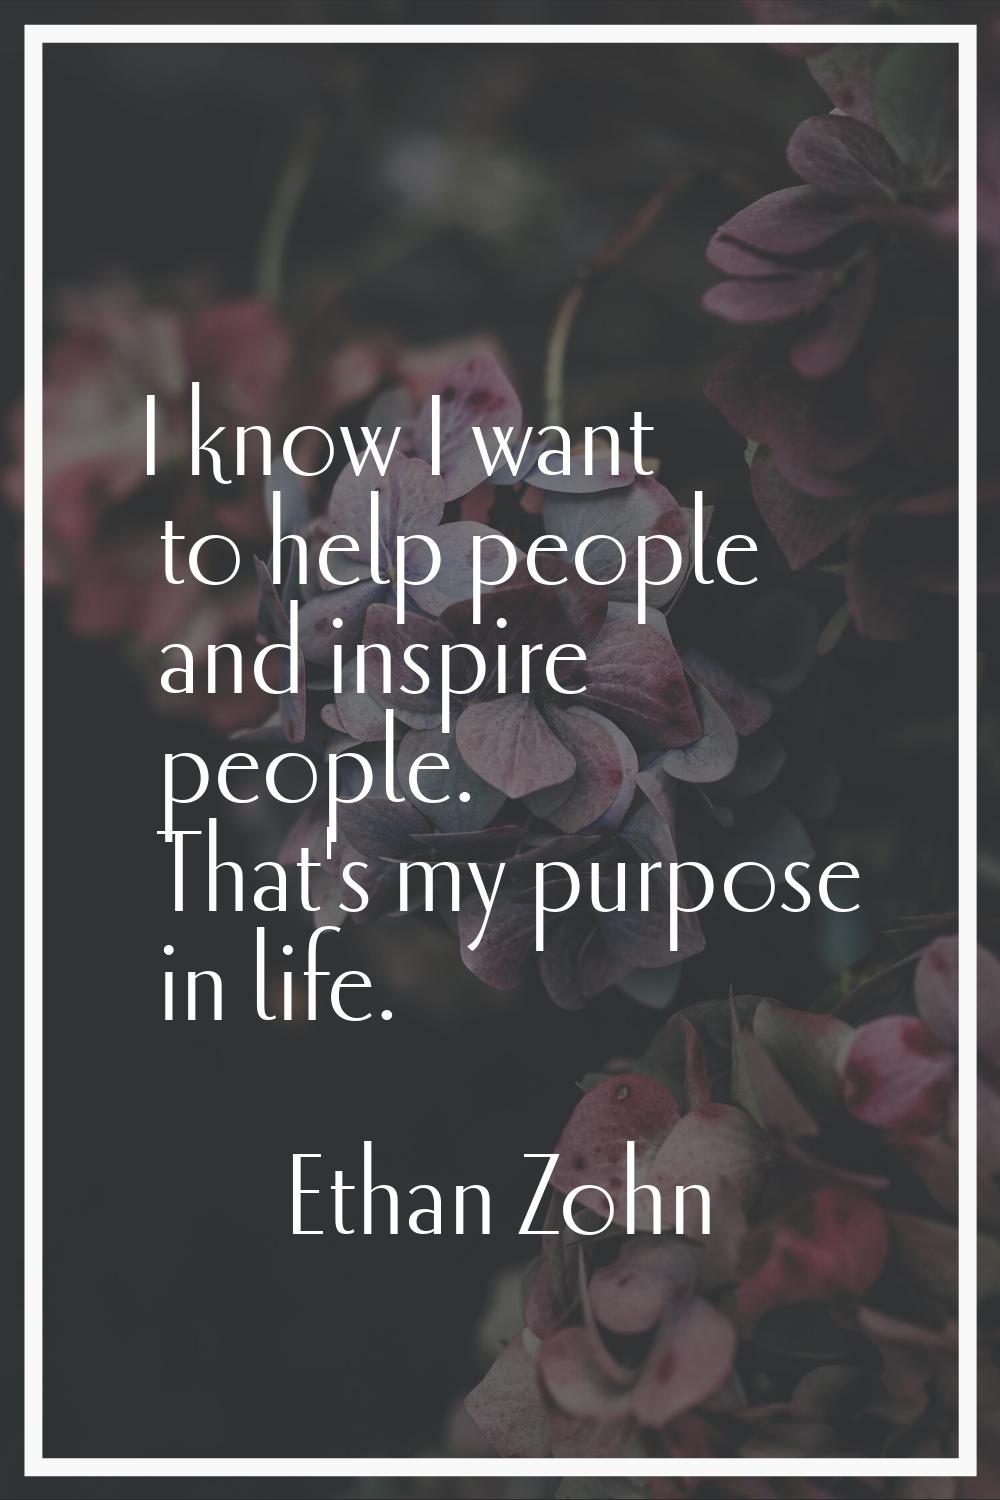 I know I want to help people and inspire people. That's my purpose in life.